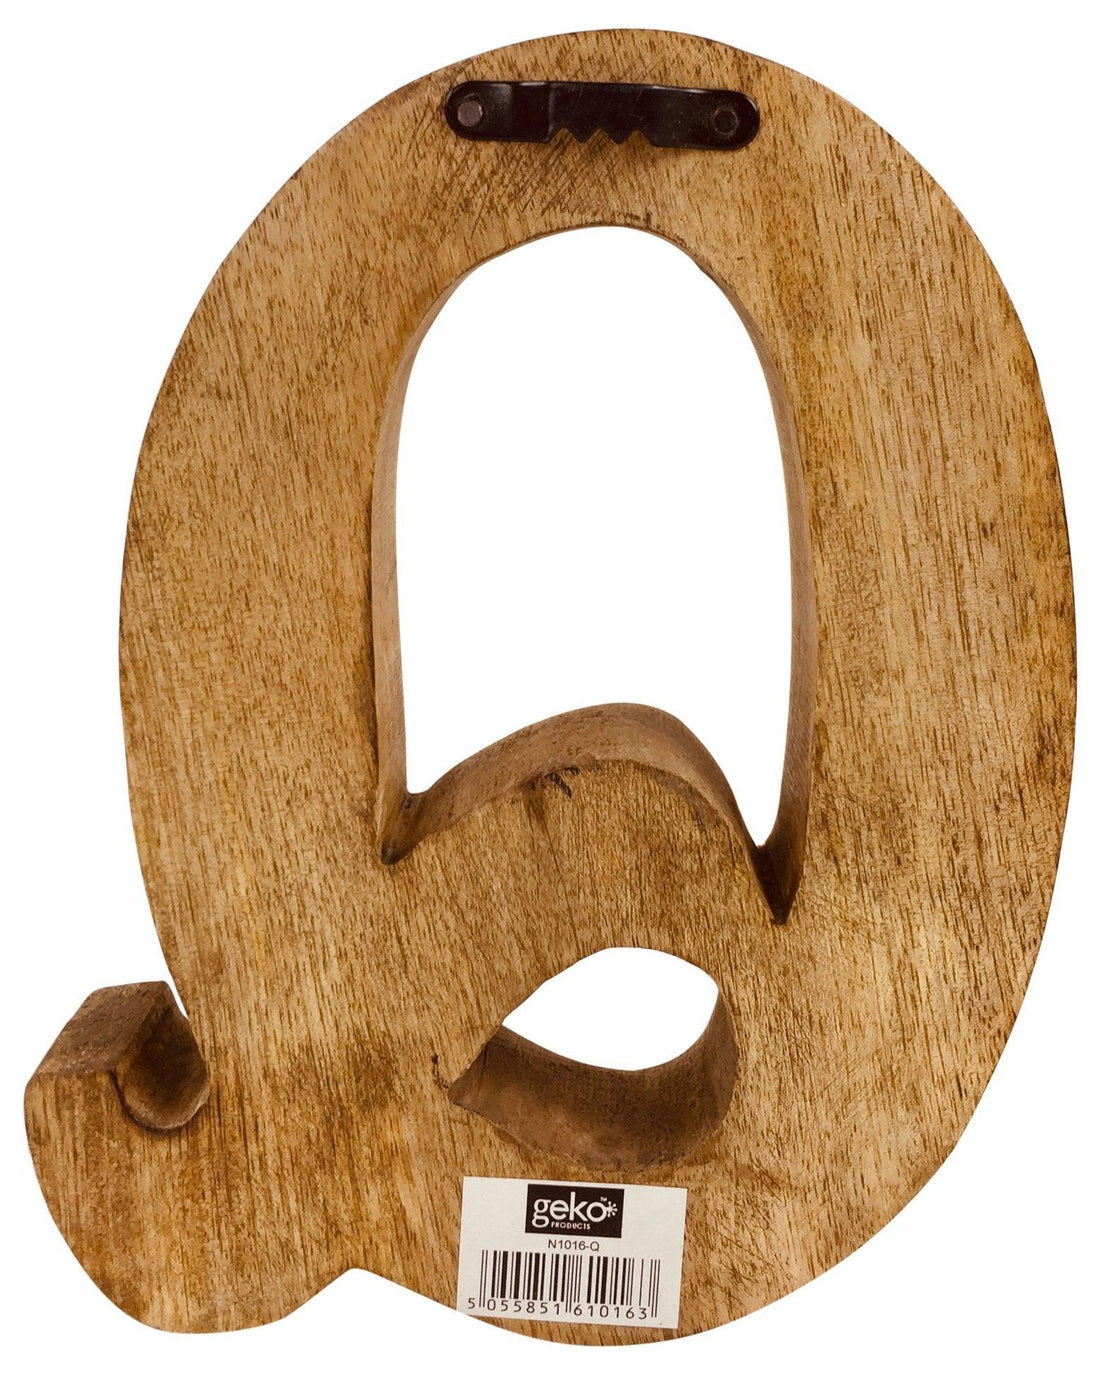 Hand Carved Wooden Geometric Letter Q - £12.99 - Single Letters 